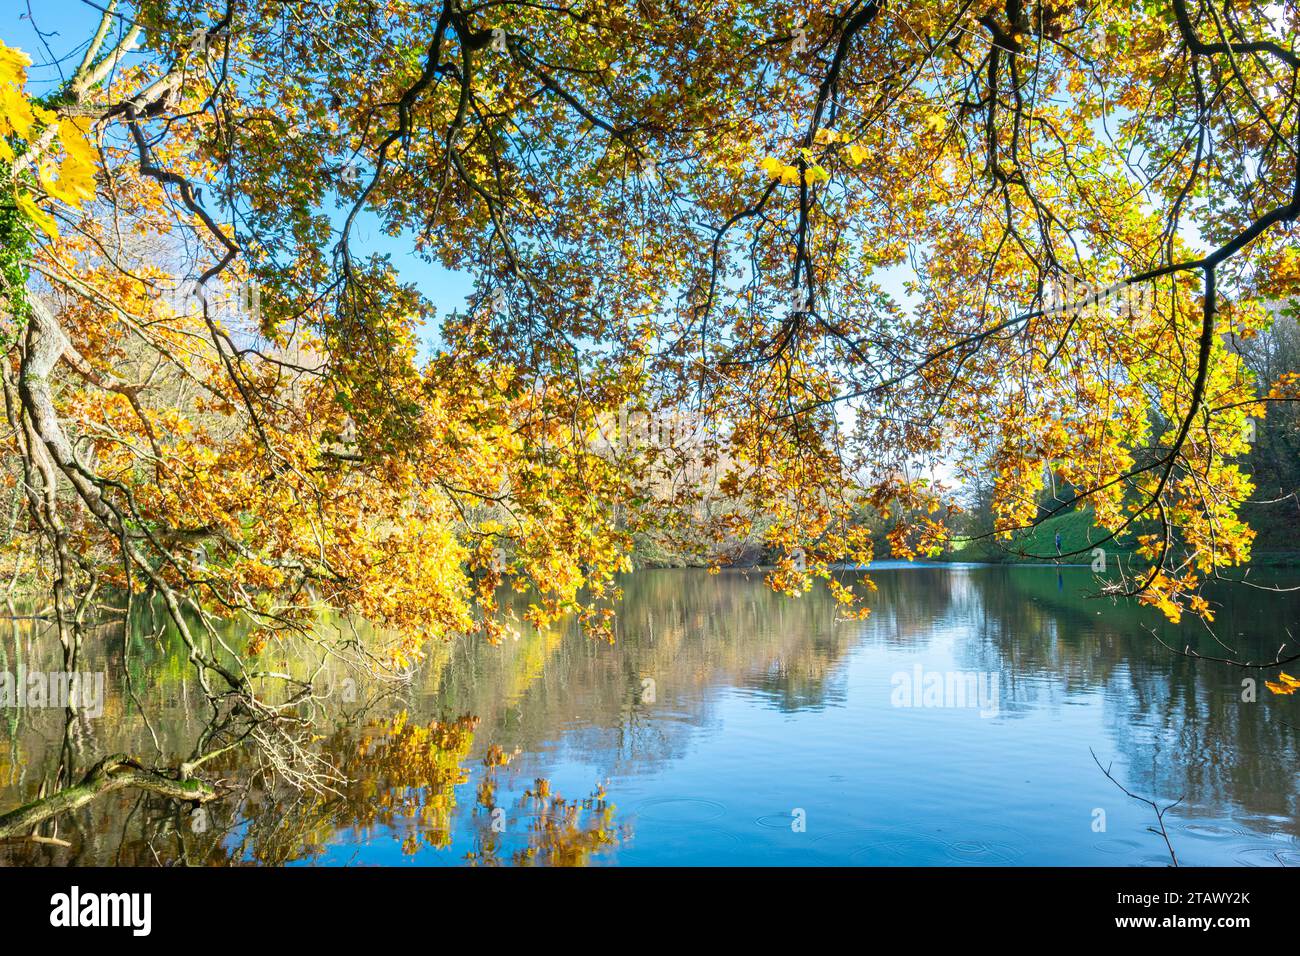 Yellow Leaves over a Blue Lake Stock Photo